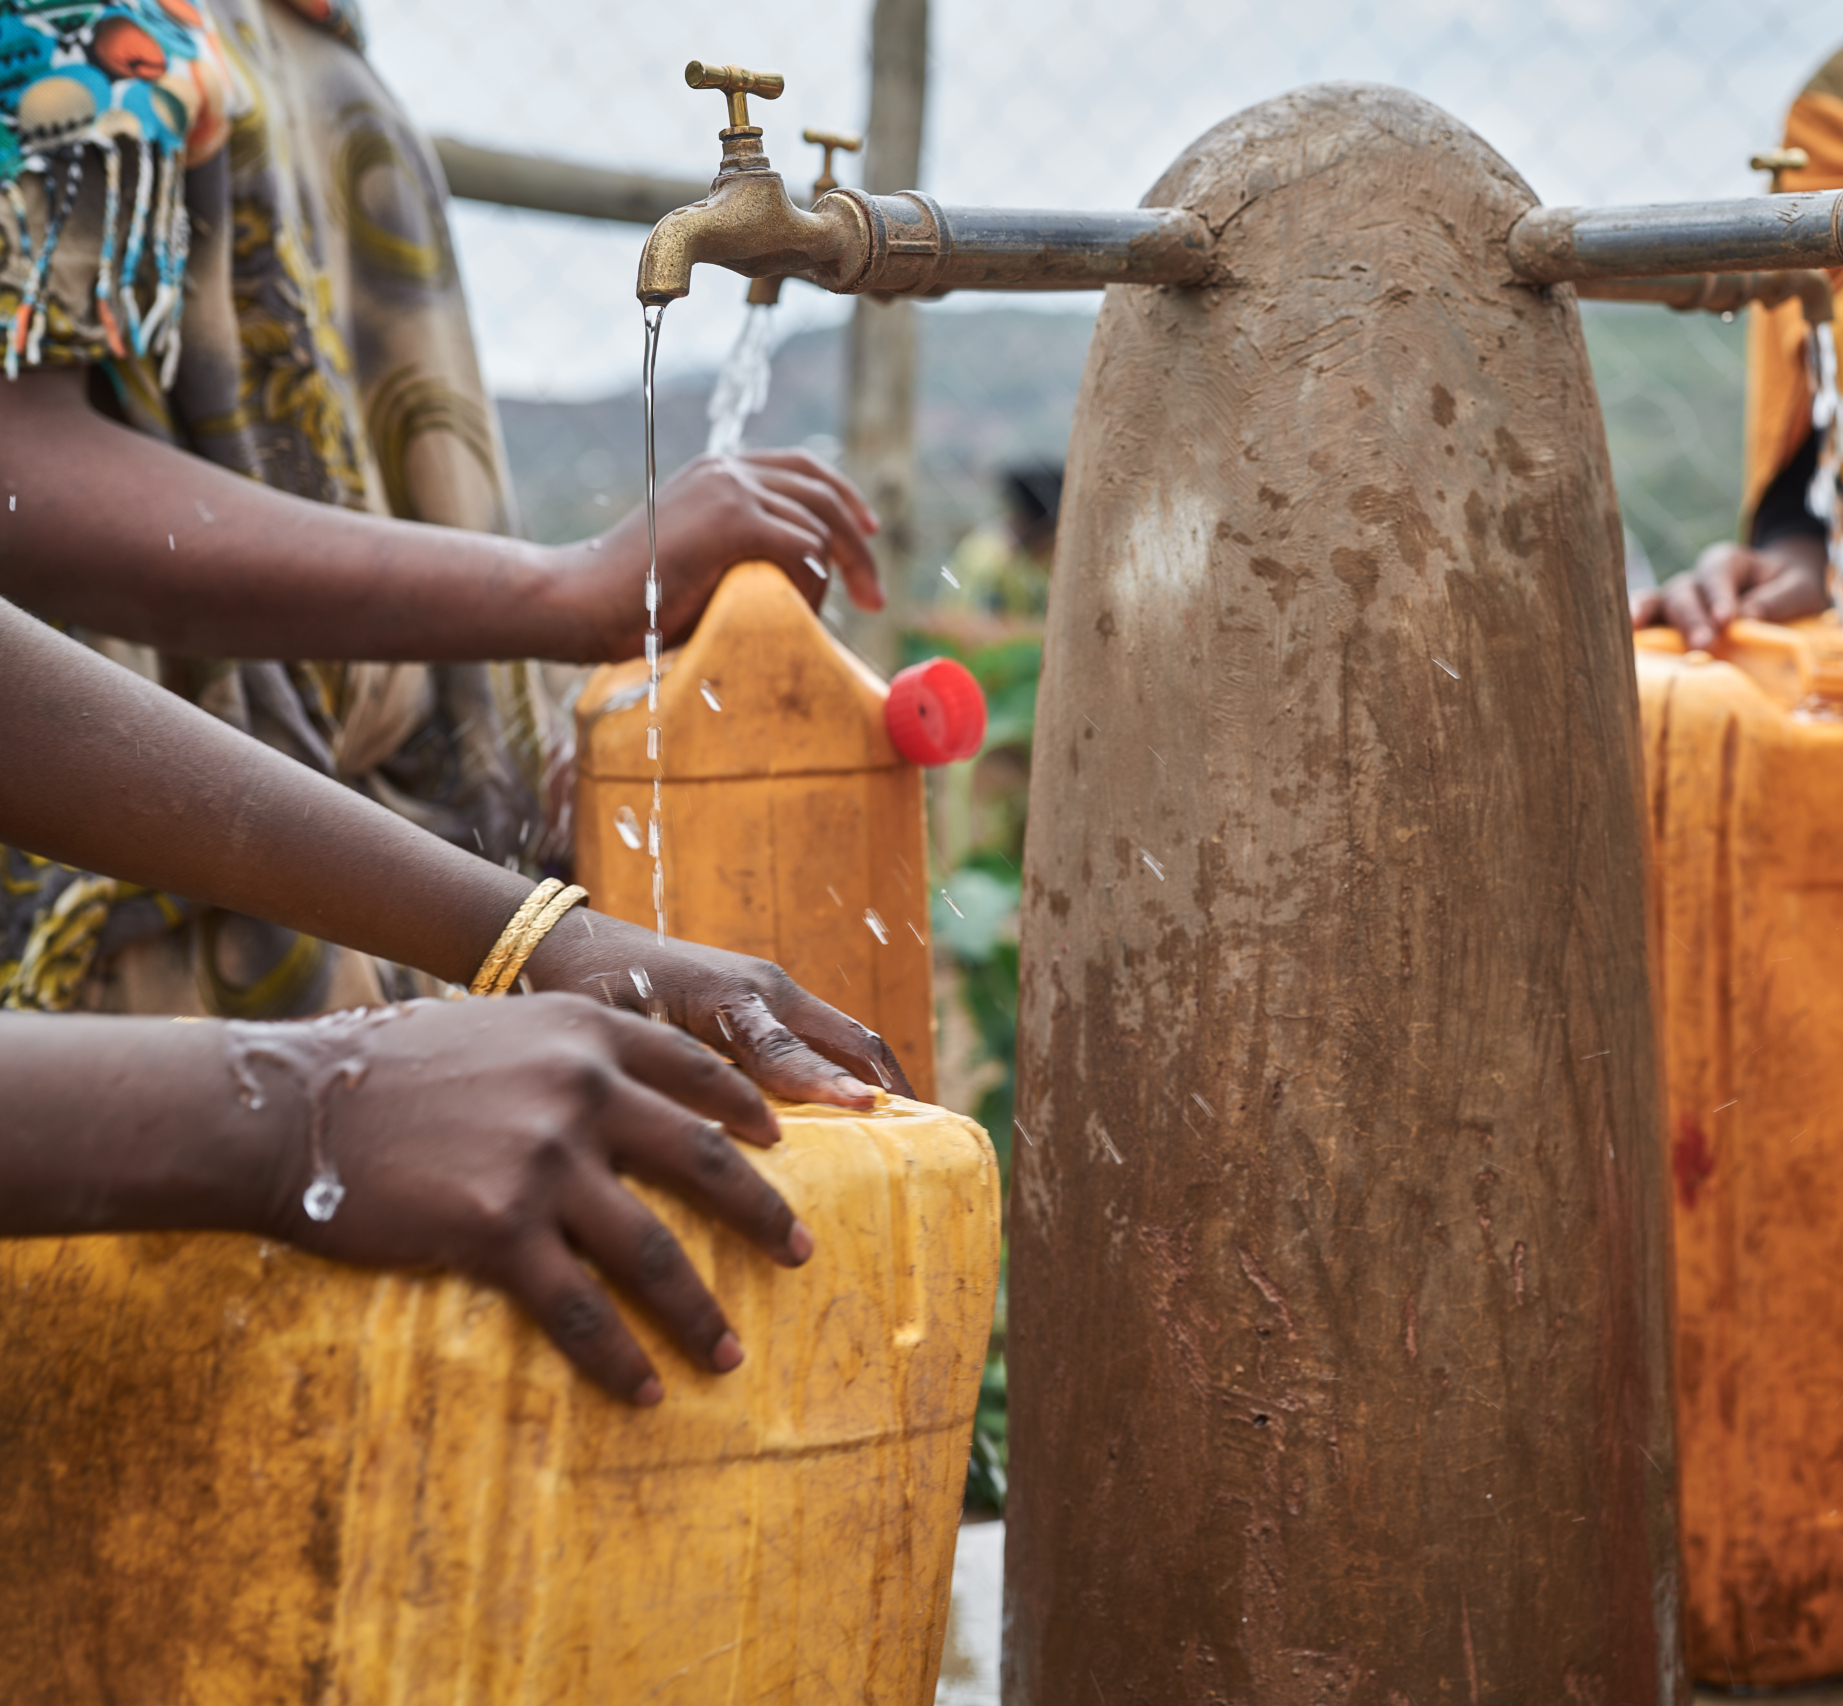 In Rural Ghana, Piped Water for Four Cents a Day